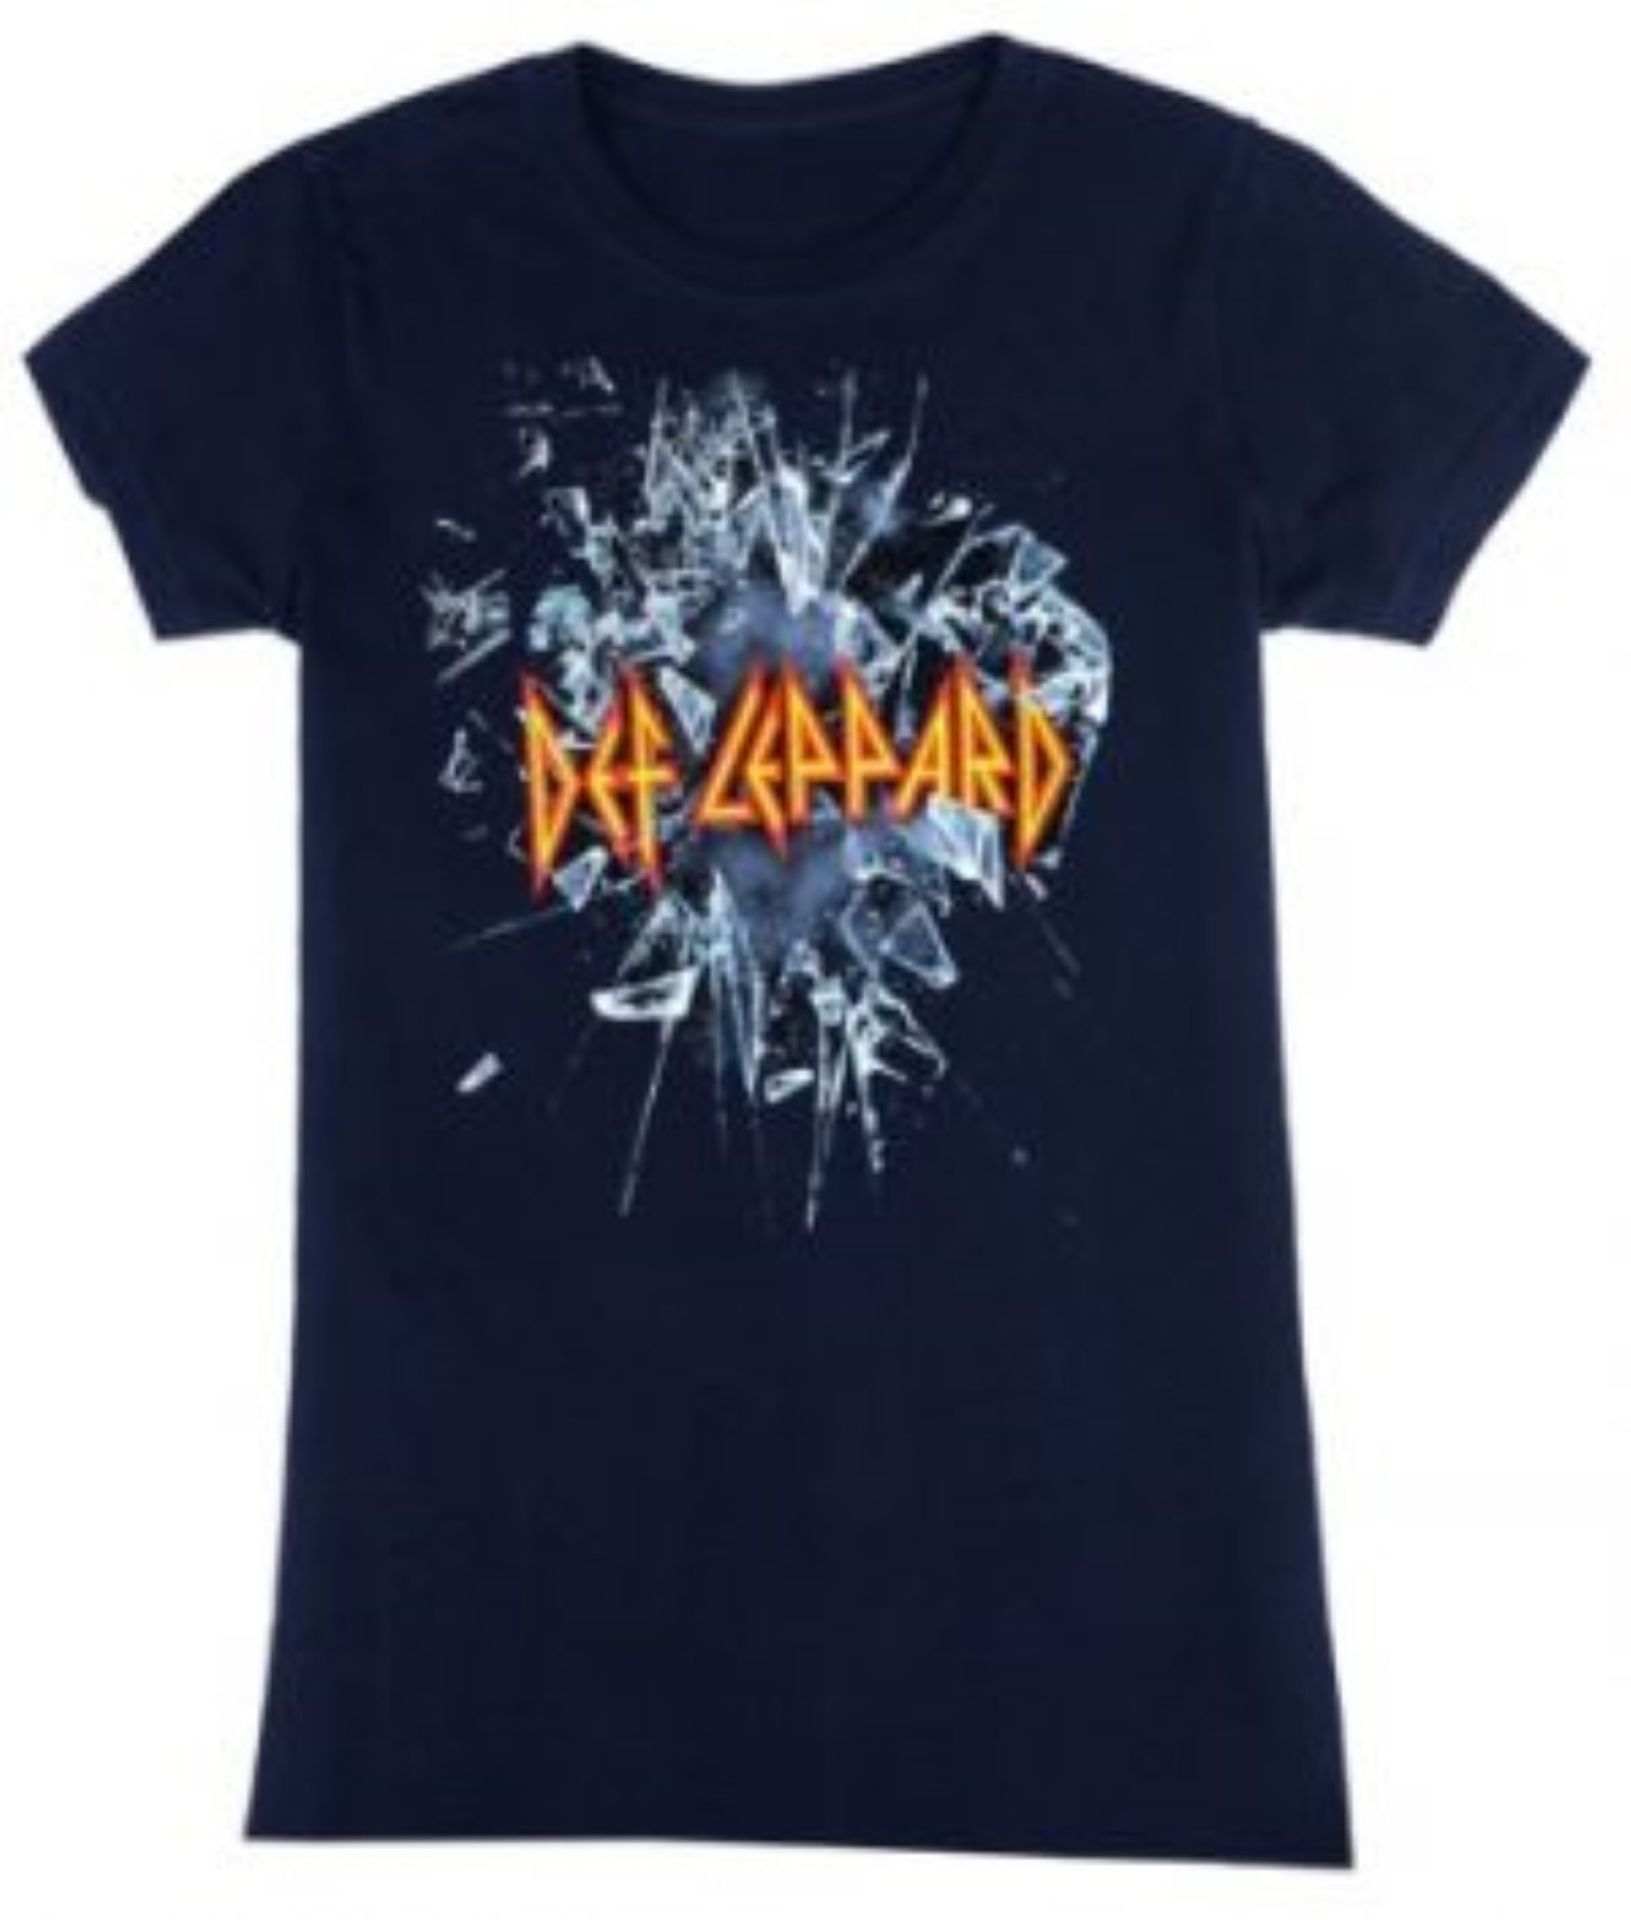 3 x DEF LEPPARD Various Designs Short Sleeve Ladies T-Shirts - Size: Large - Officially Licensed - Image 5 of 6